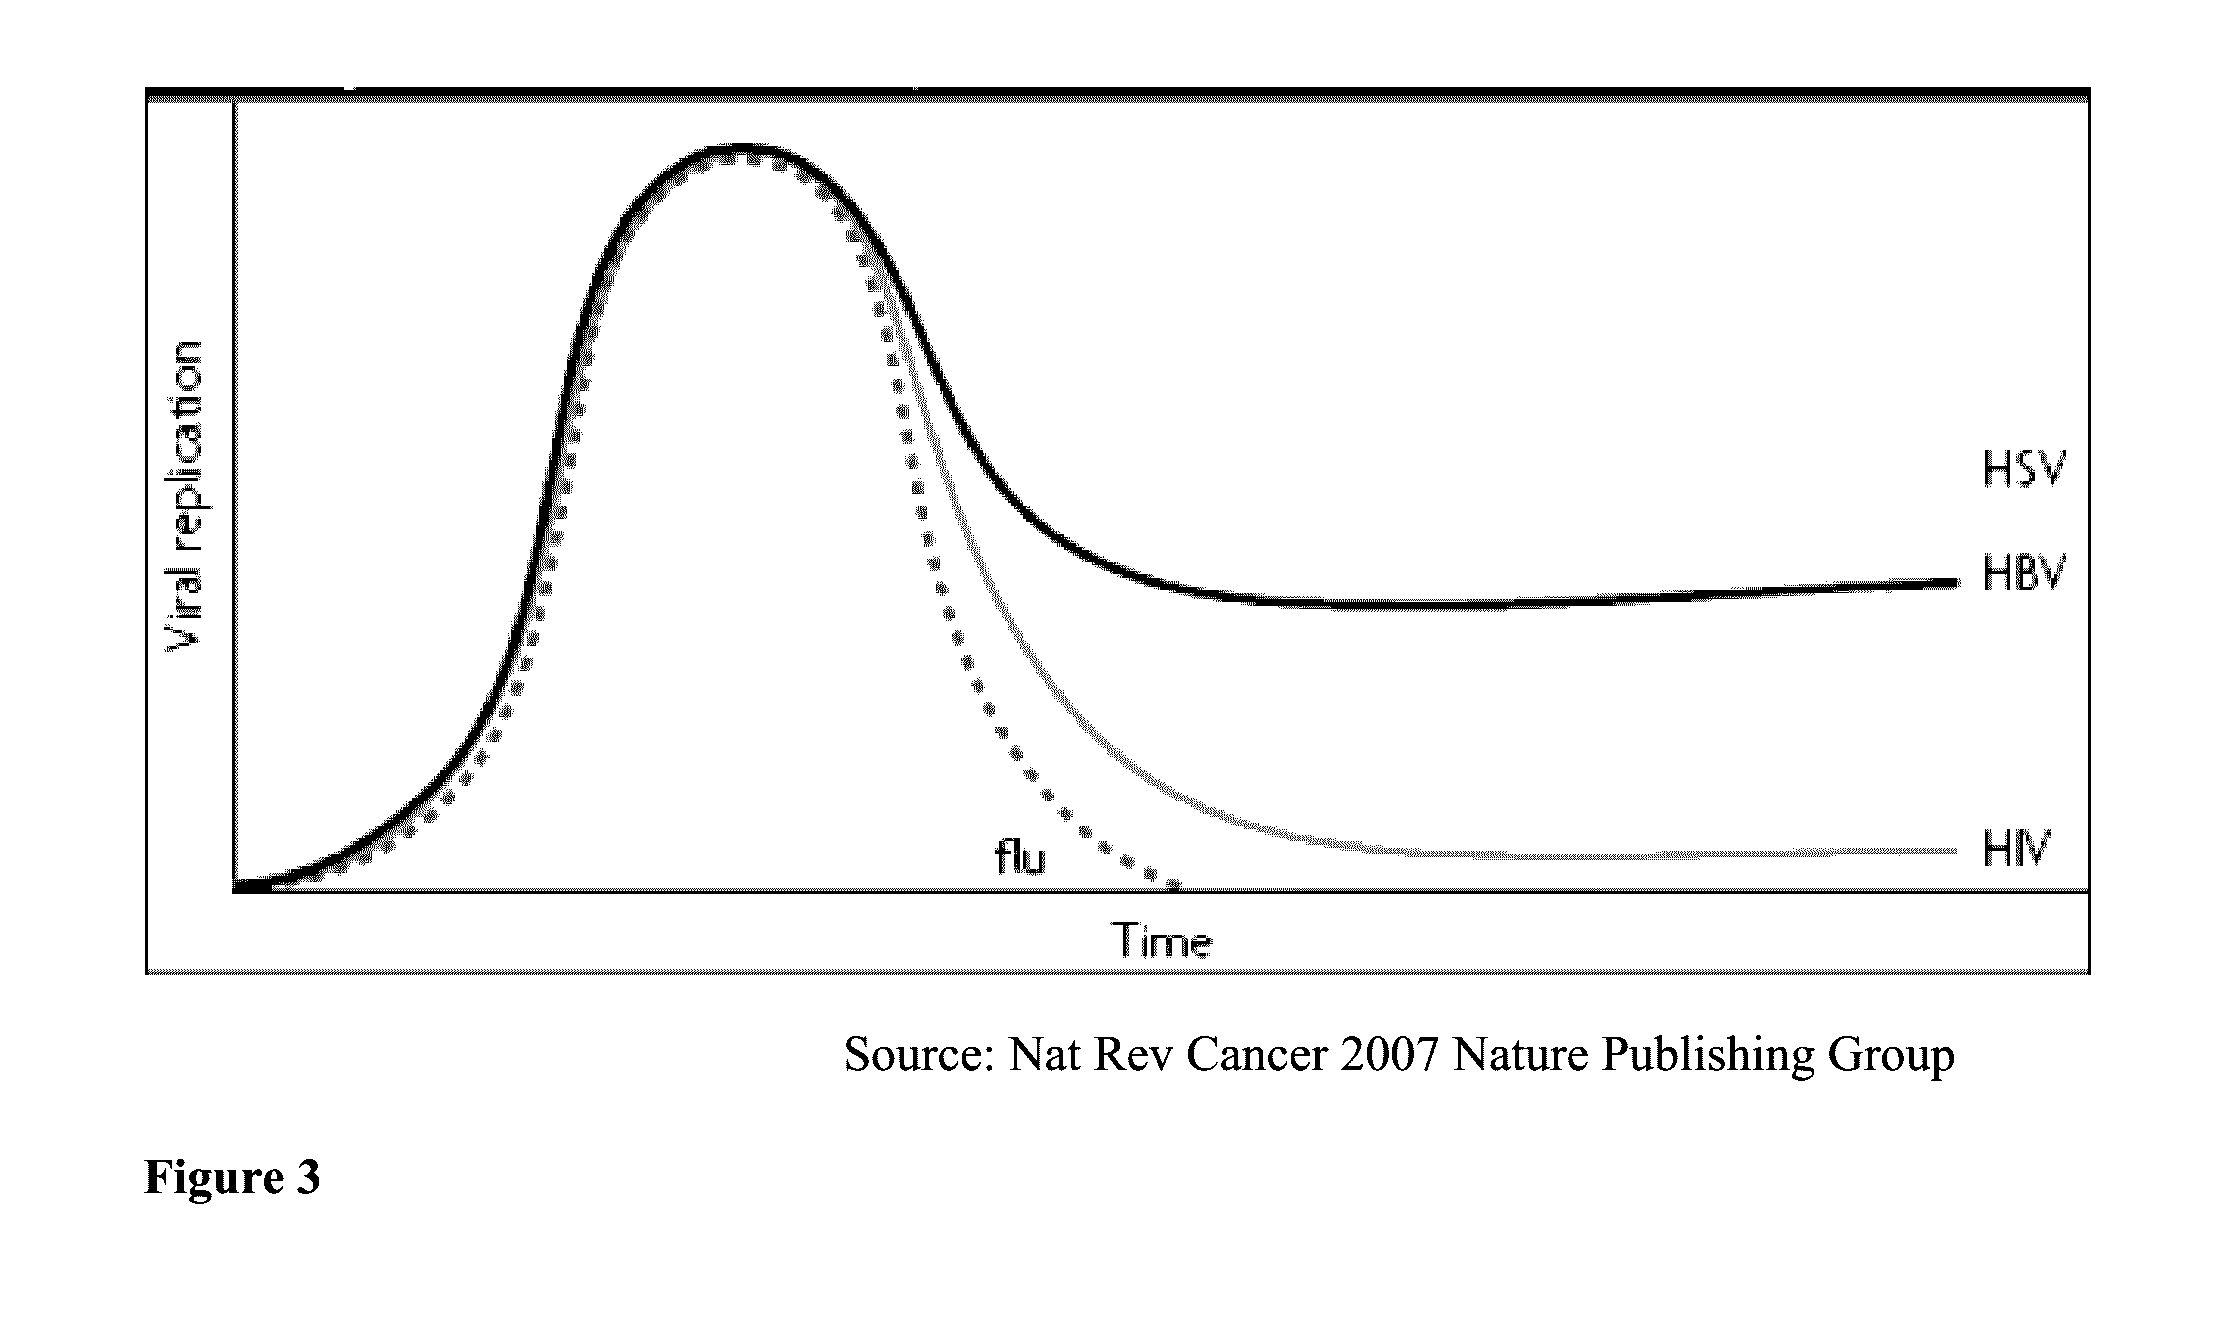 Method for diagnosing, quantifying, treating, monitoring or evaluating conditions, diseases or disorders associated with human papilloma virus (HPV) infection